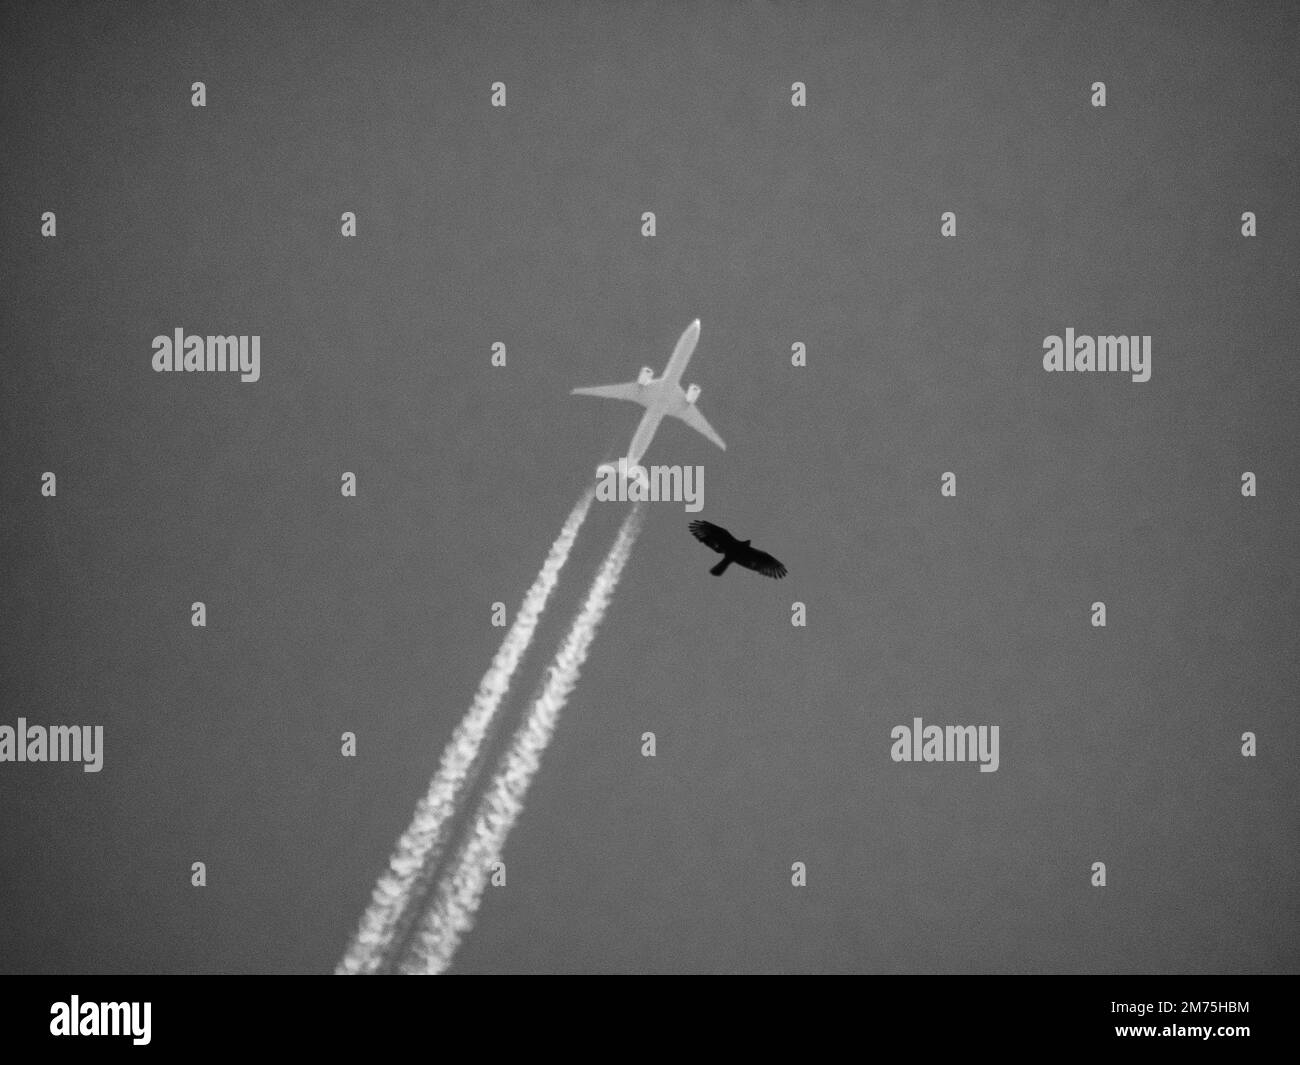 Aeroplane, condensation trails, falcon in flight, cross-fade technique, double exposure, black and white, Baden-Baden, Baden-Wuerttemberg, Germany Stock Photo